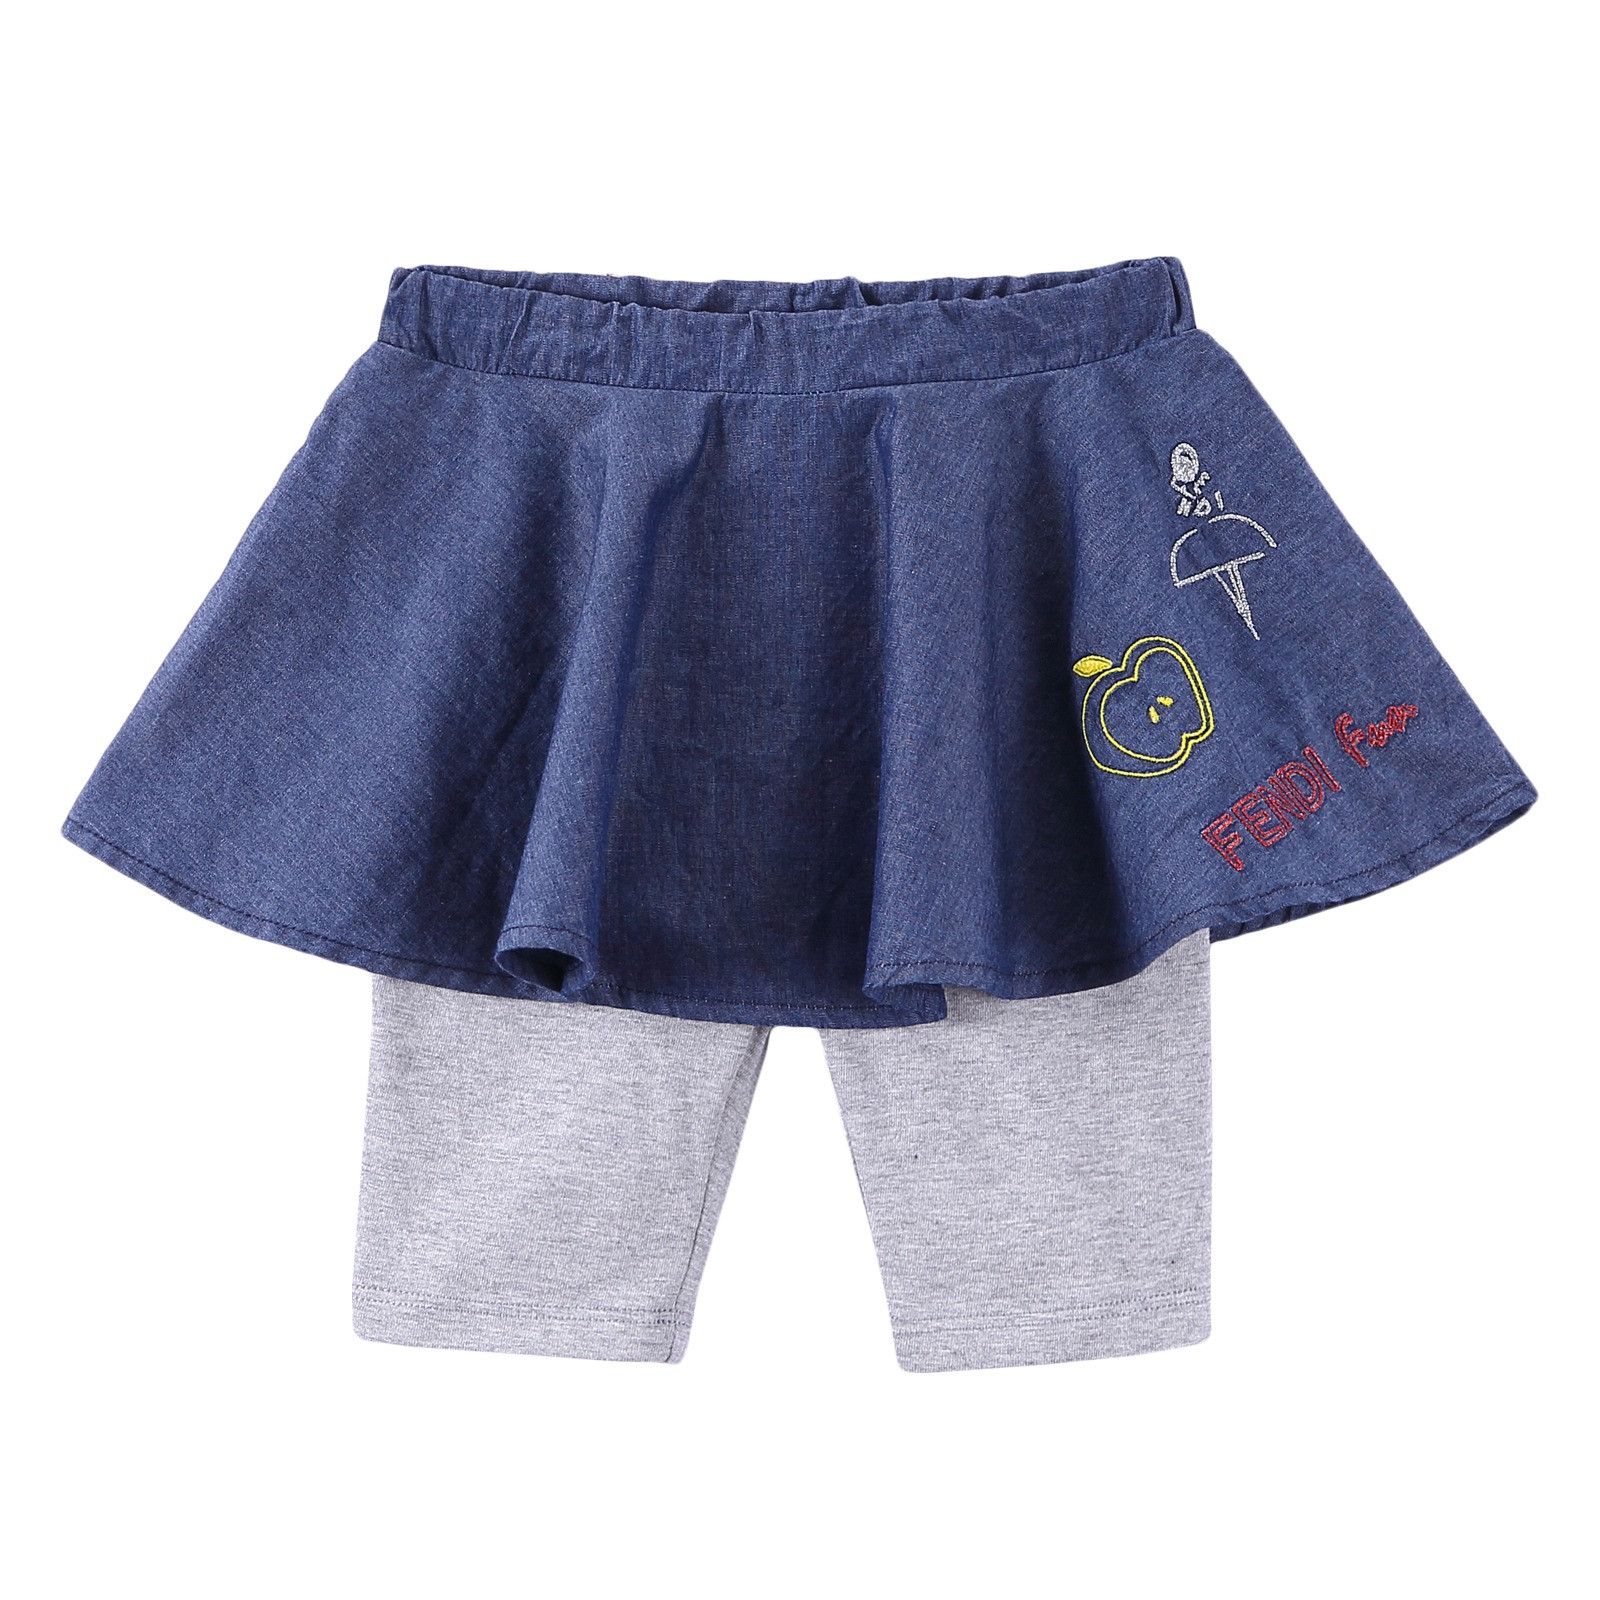 Baby Girls Blue Embroidered Trims Skirt With Grey Leggings - CÉMAROSE | Children's Fashion Store - 1